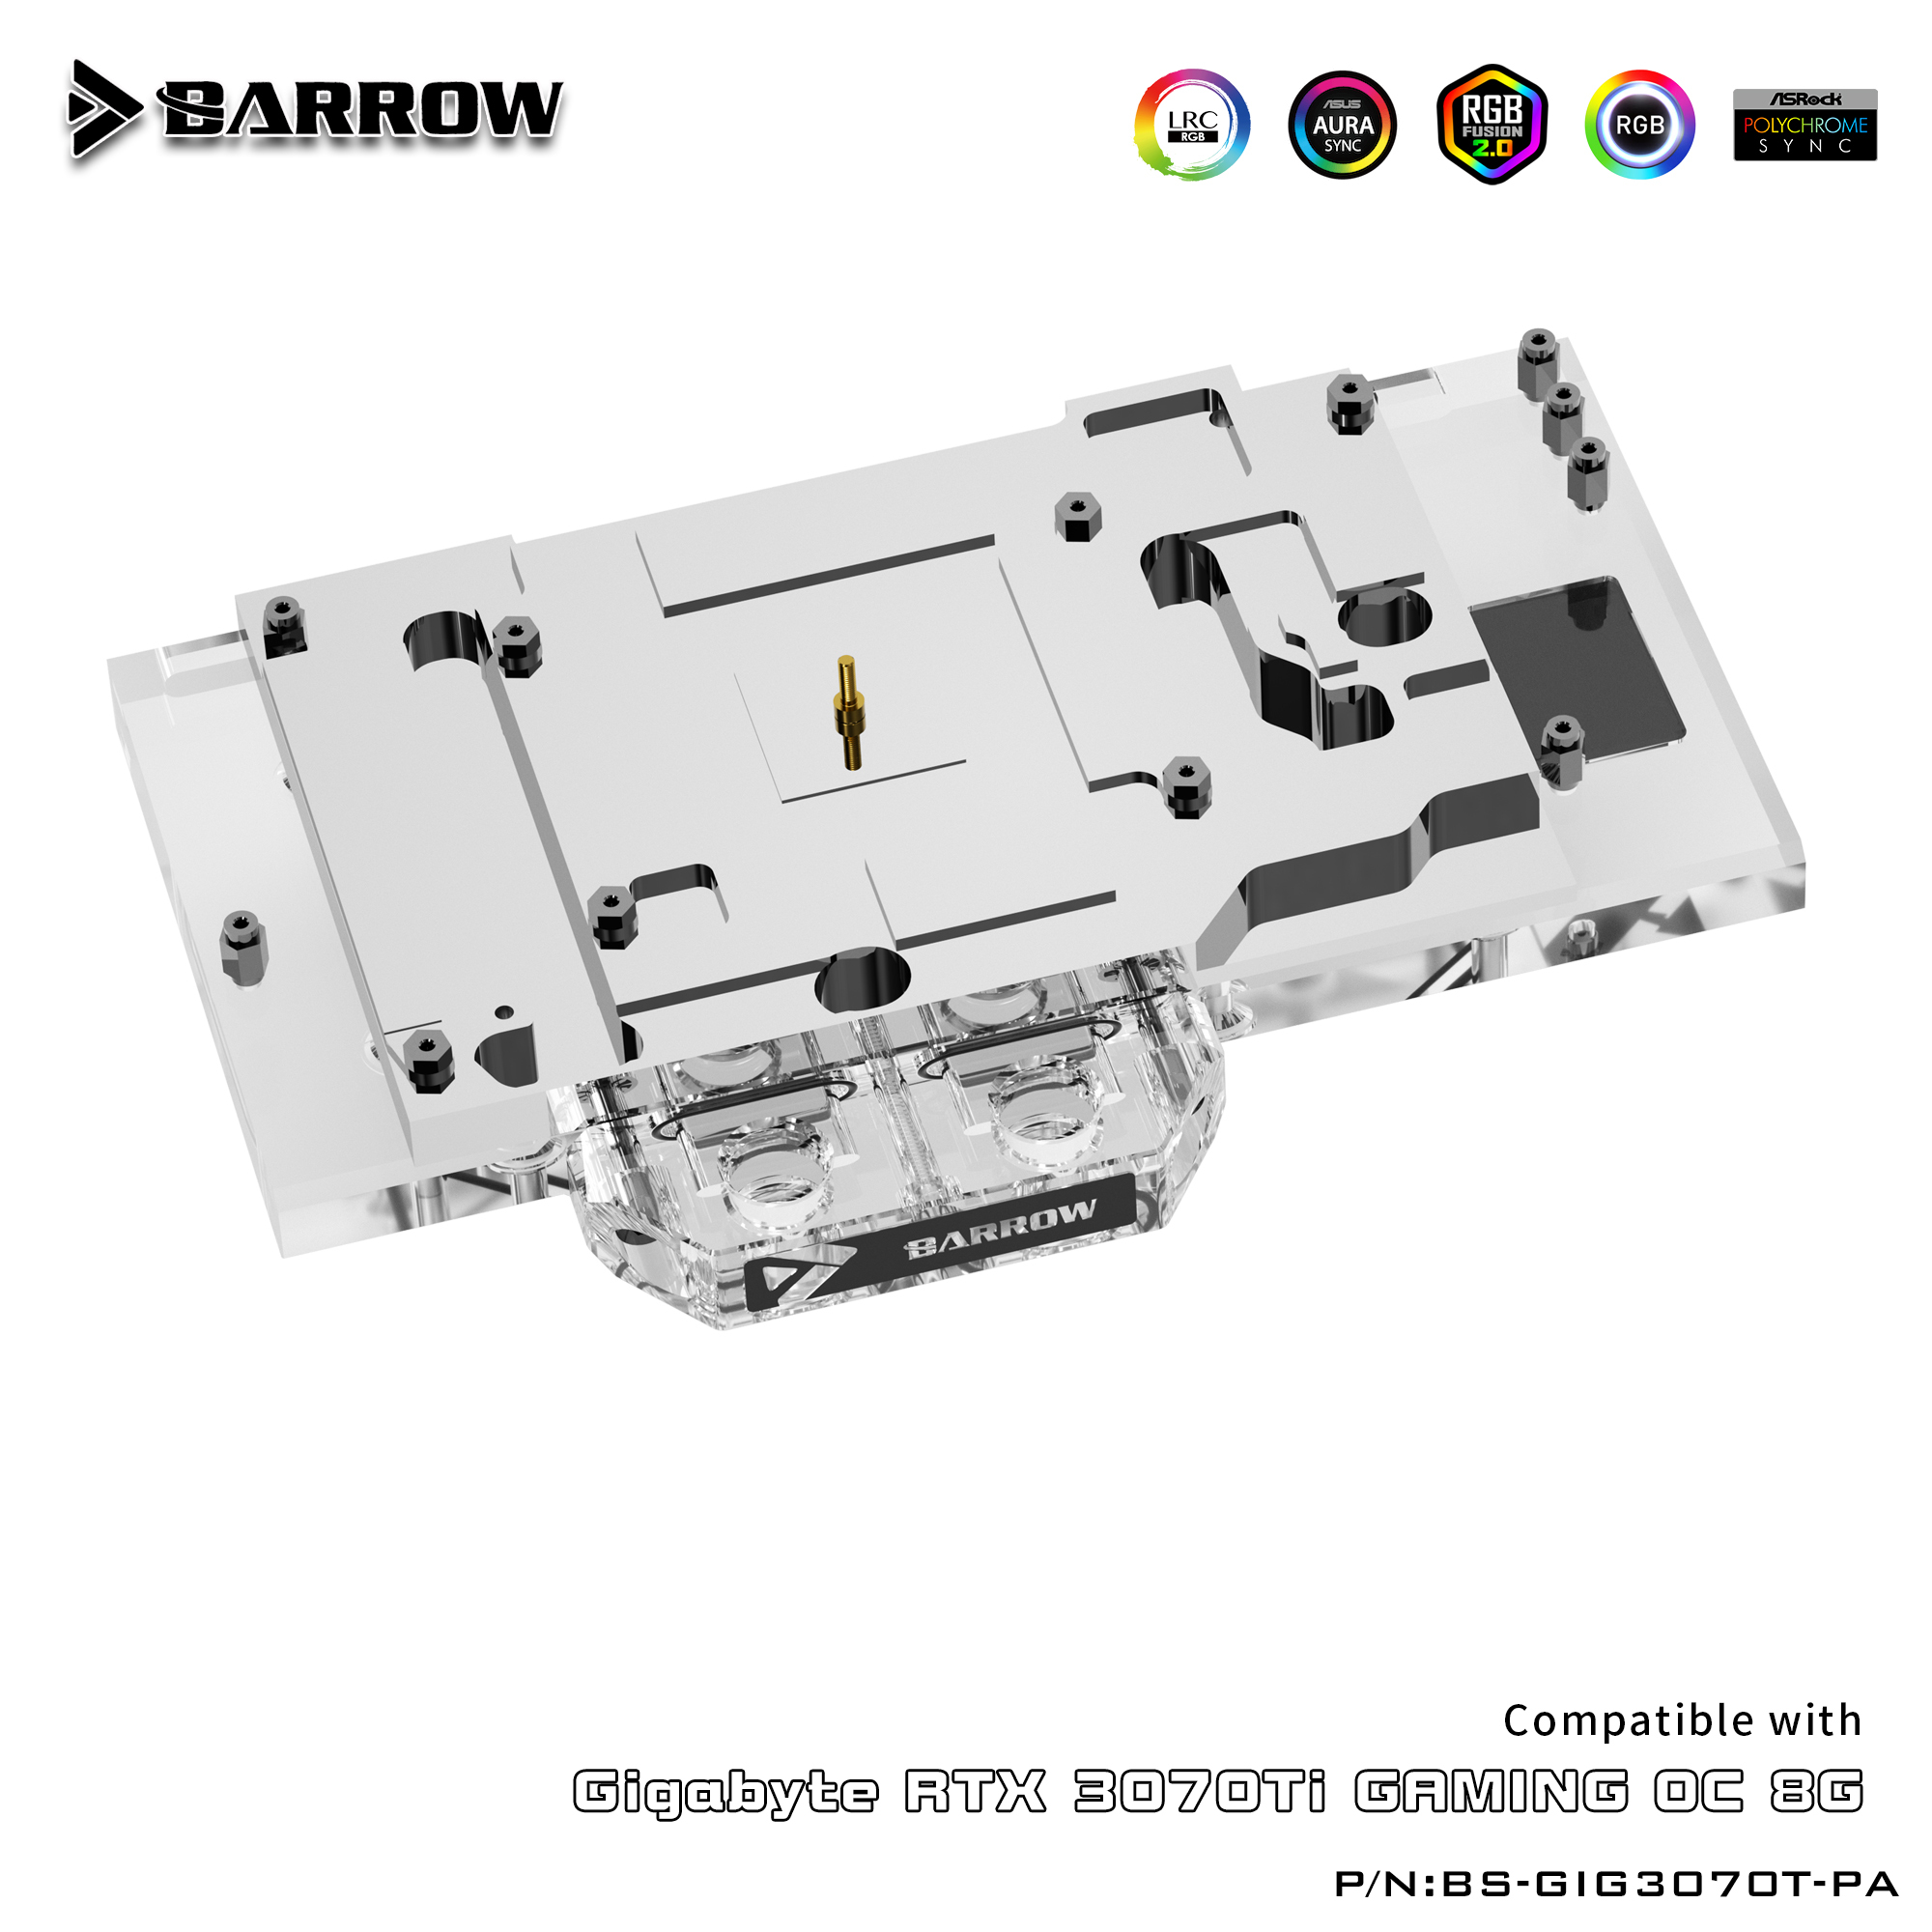 https://images.51microshop.com/860/product/20210730/Barrow_GPU_Water_Block_For_Gigabyte_3070Ti_GAMING_OC_8G_GPU_Card_Full_Cover_Water_Cooling_With_Backplate_BS_GIG3070T_PA_1627636471494_4.jpg